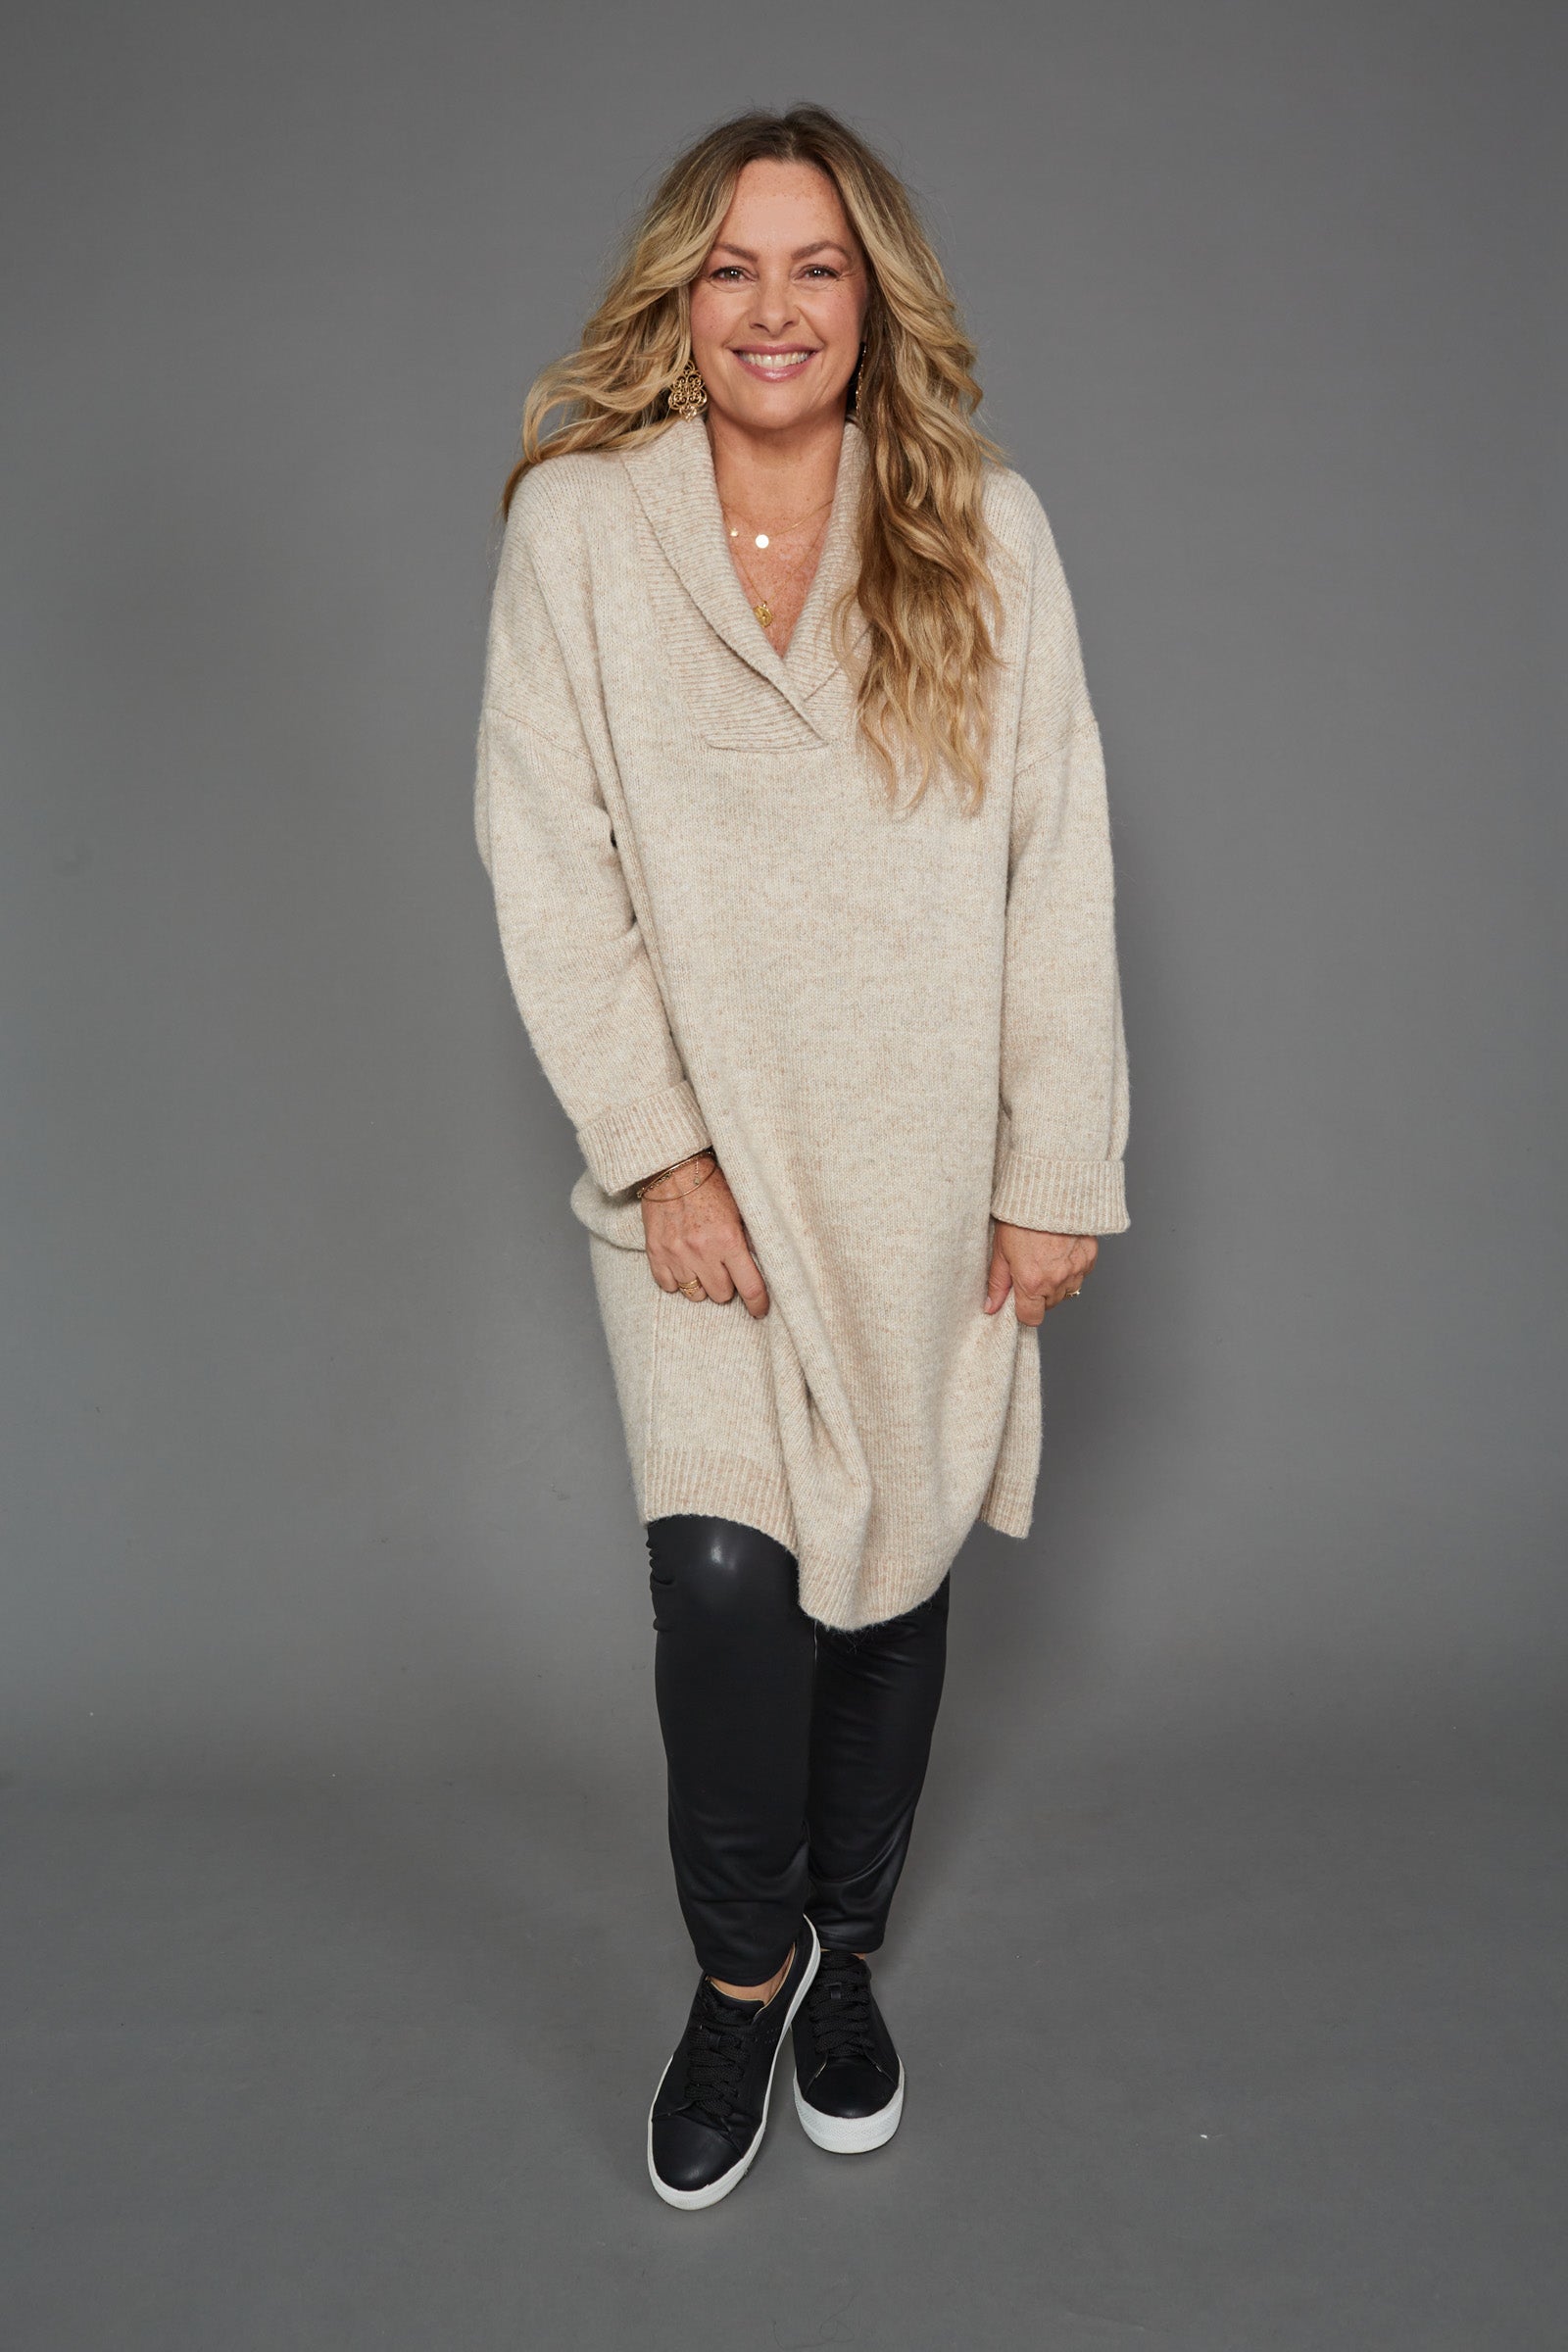 Paarl Top/Dress - Oat - eb&ive Clothing - Knit Jumper One Size